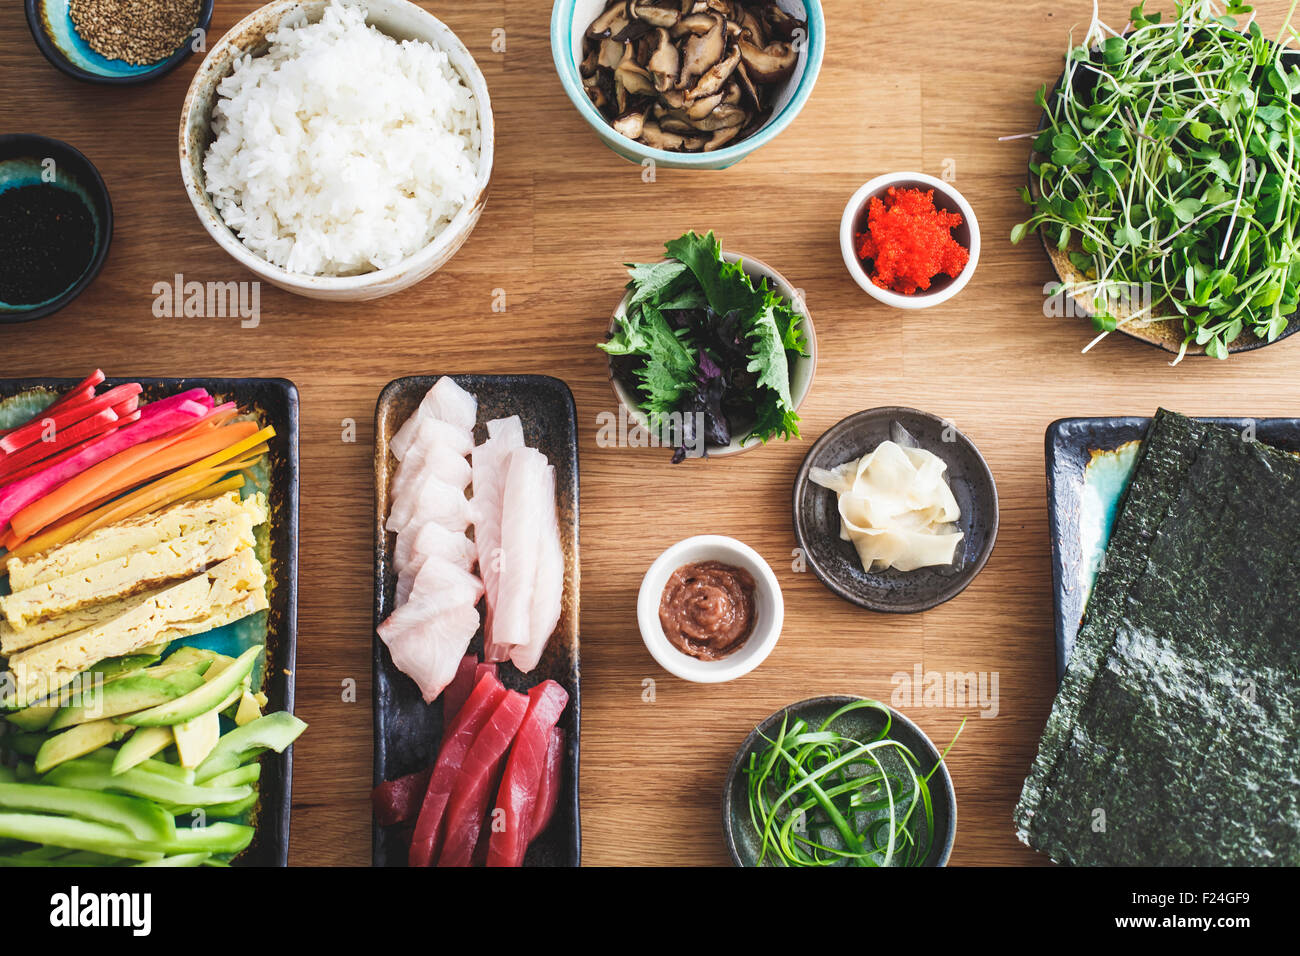 https://c8.alamy.com/comp/F24GF9/the-making-of-sushi-ingredients-for-sushi-F24GF9.jpg